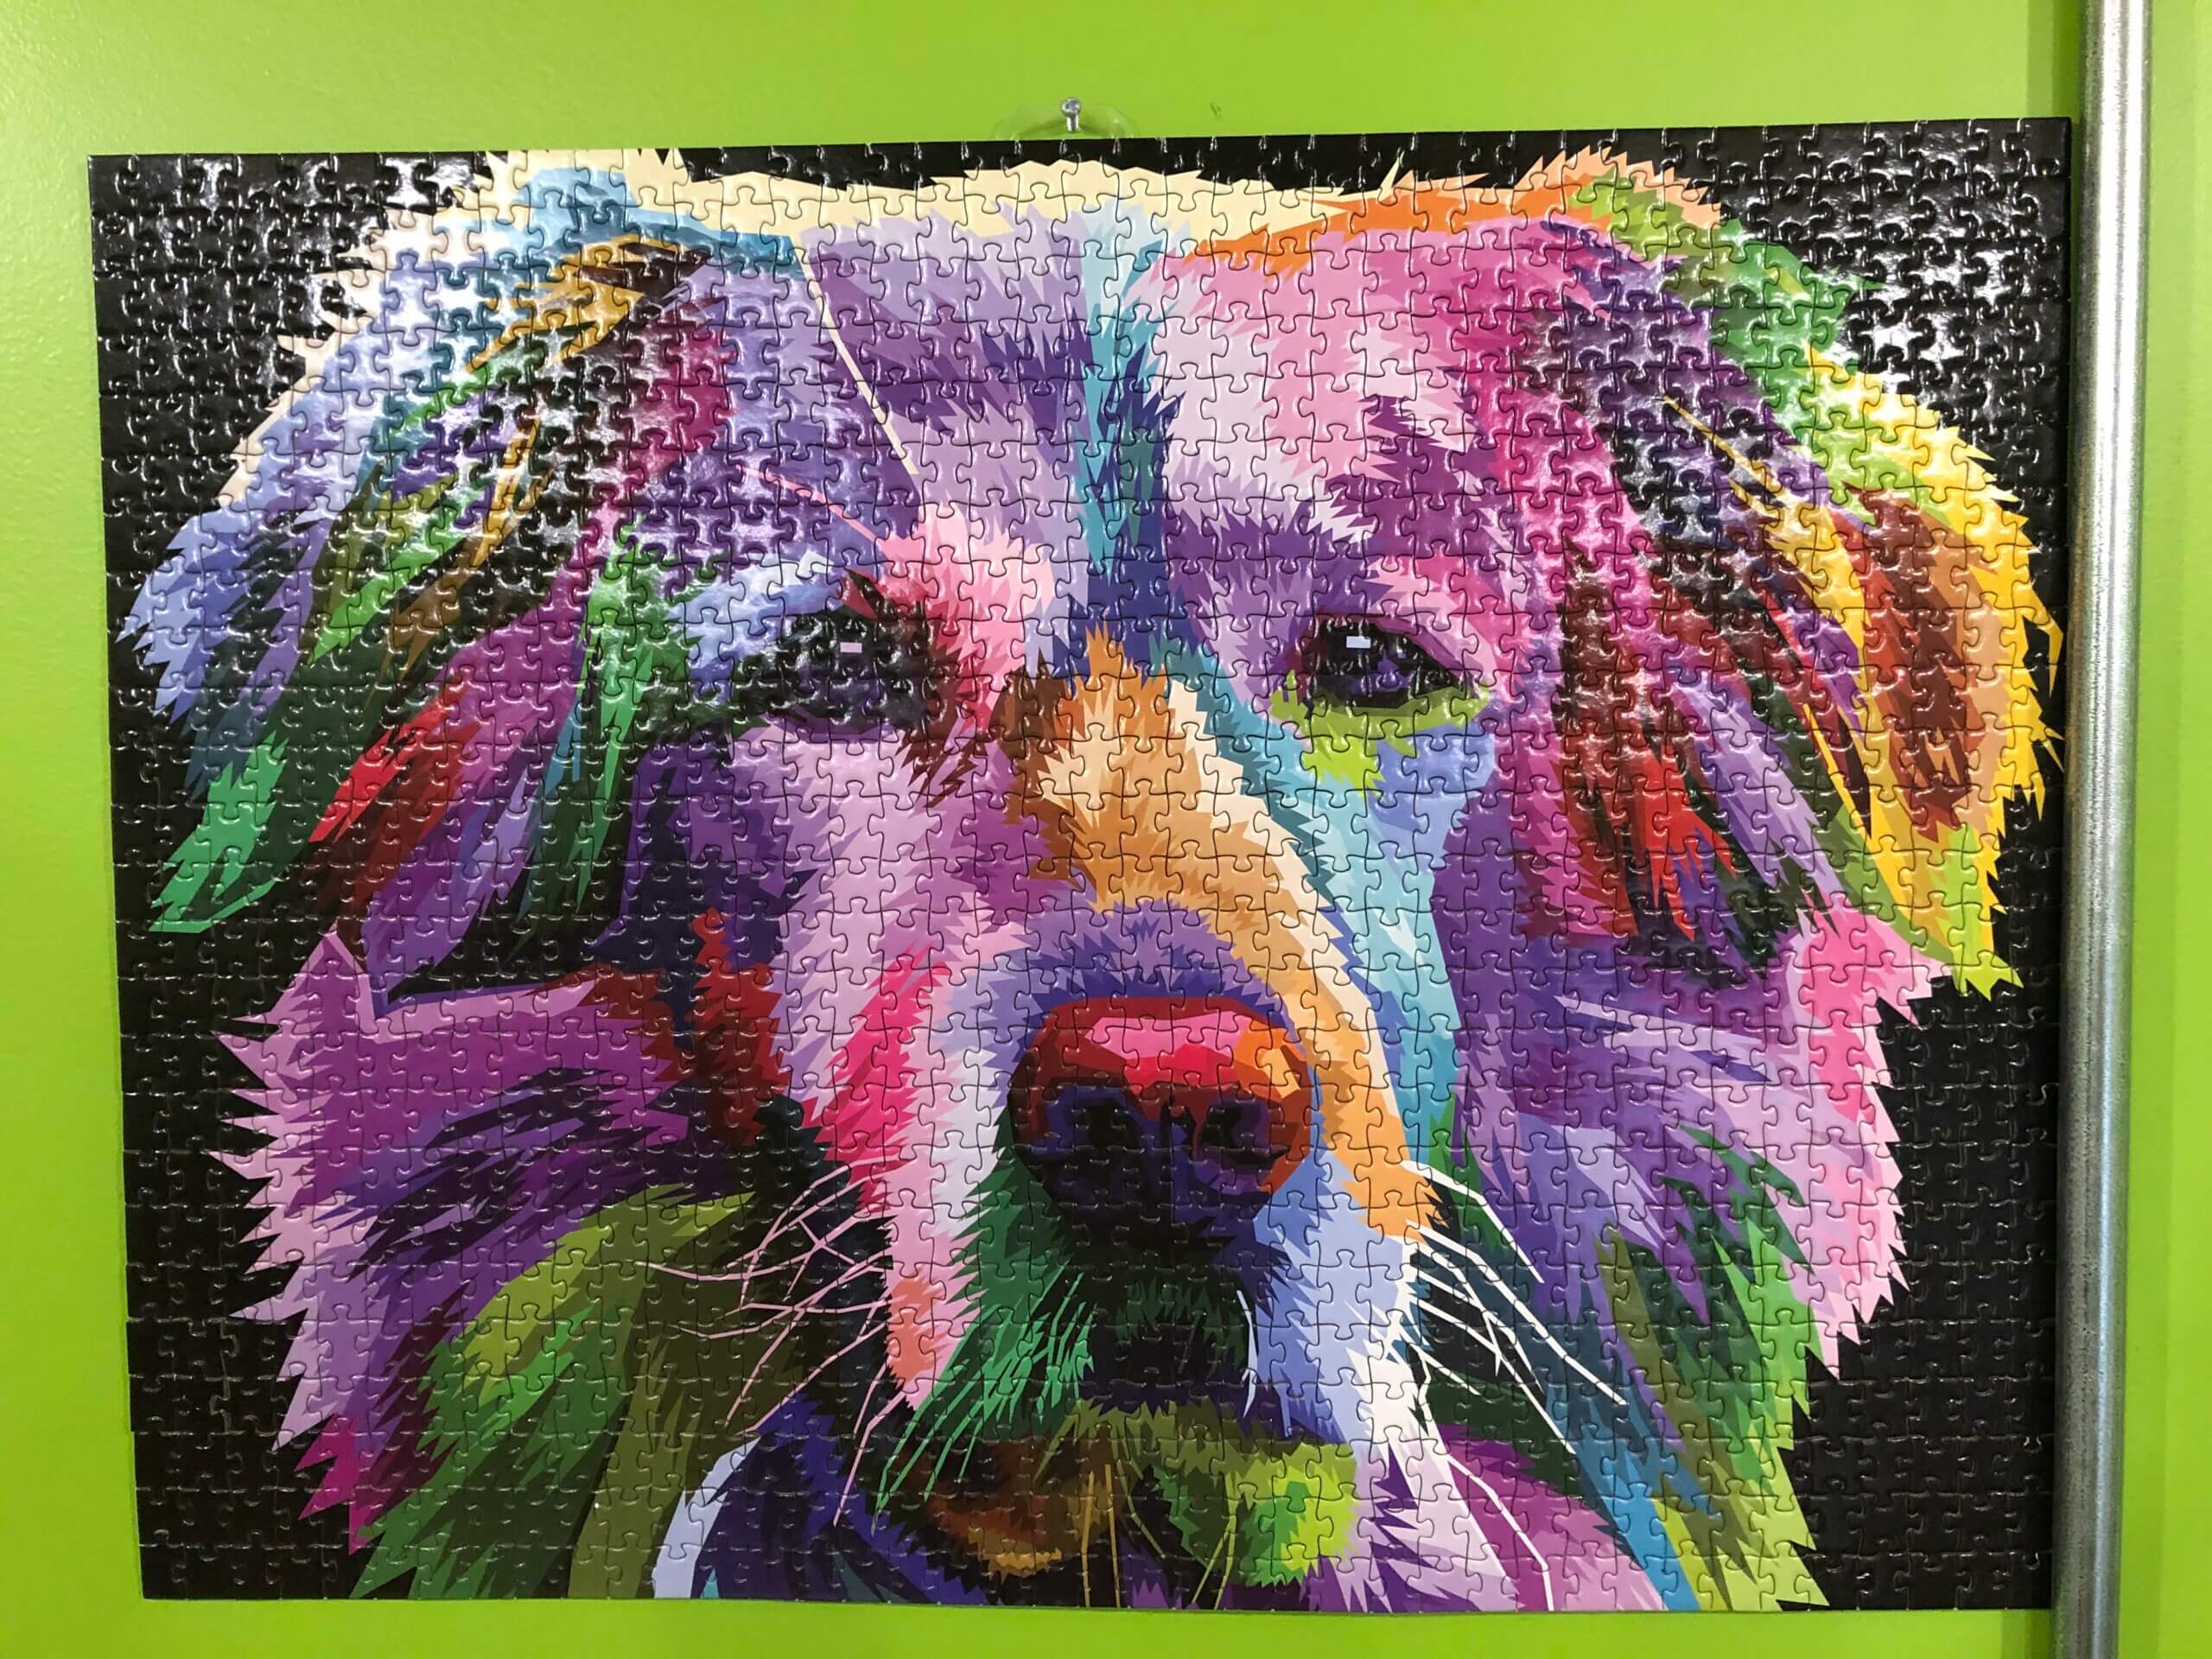 Puzzle Completed